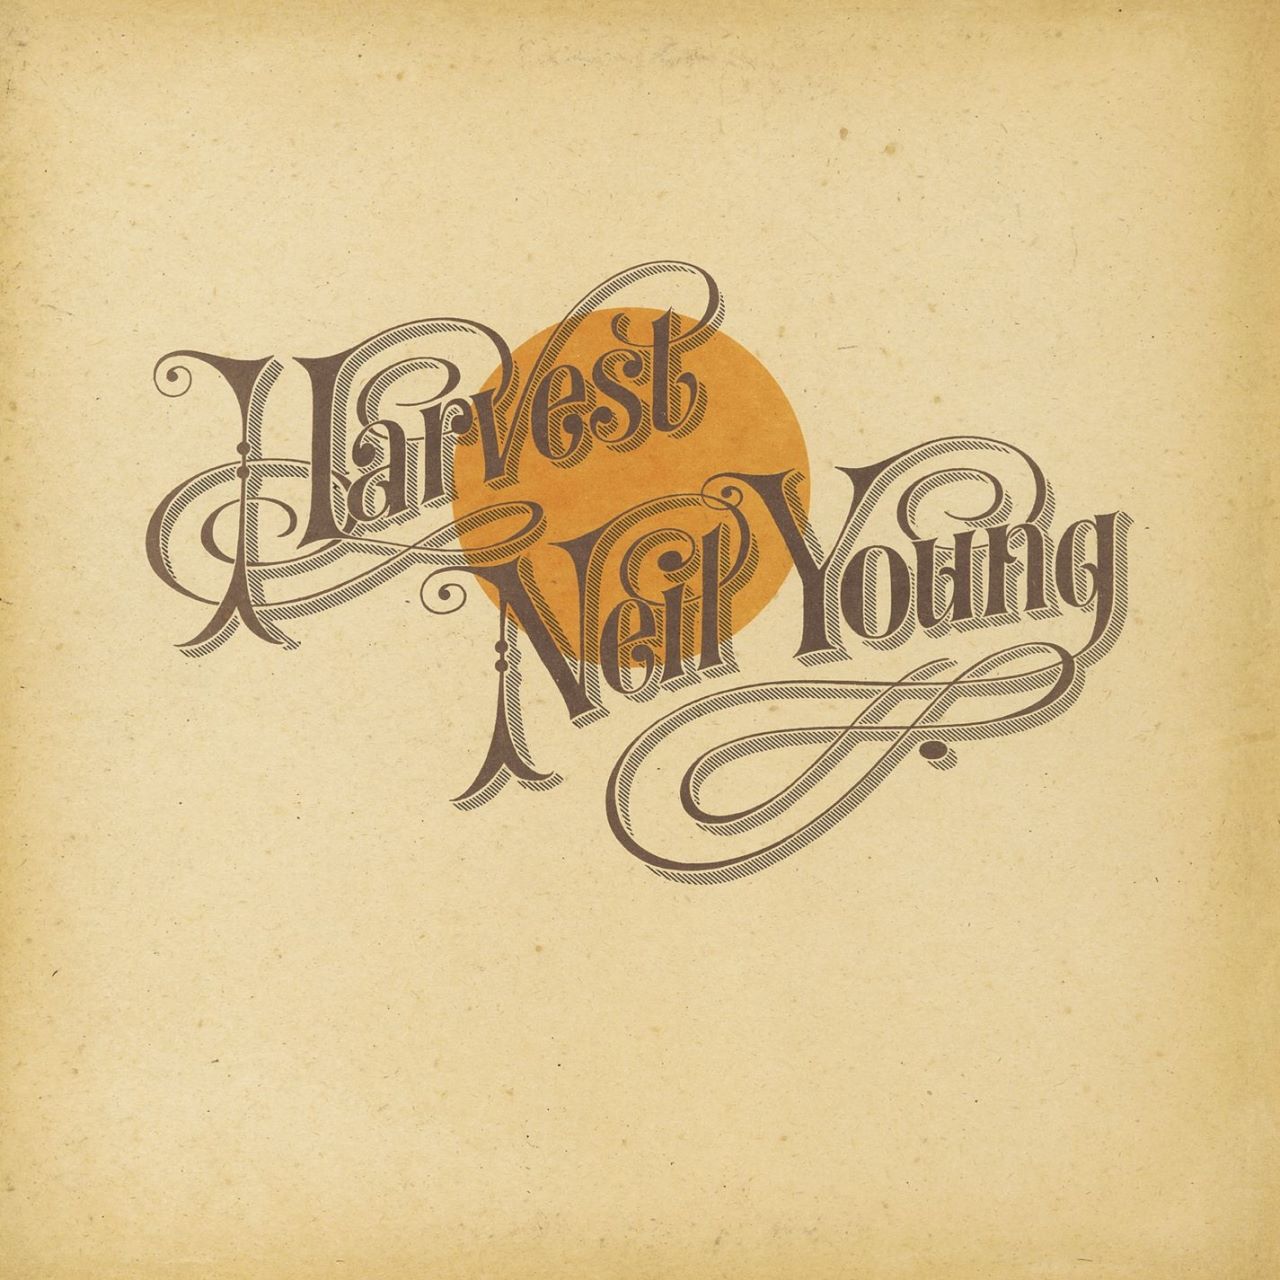 Neil Young - Harvest cover album